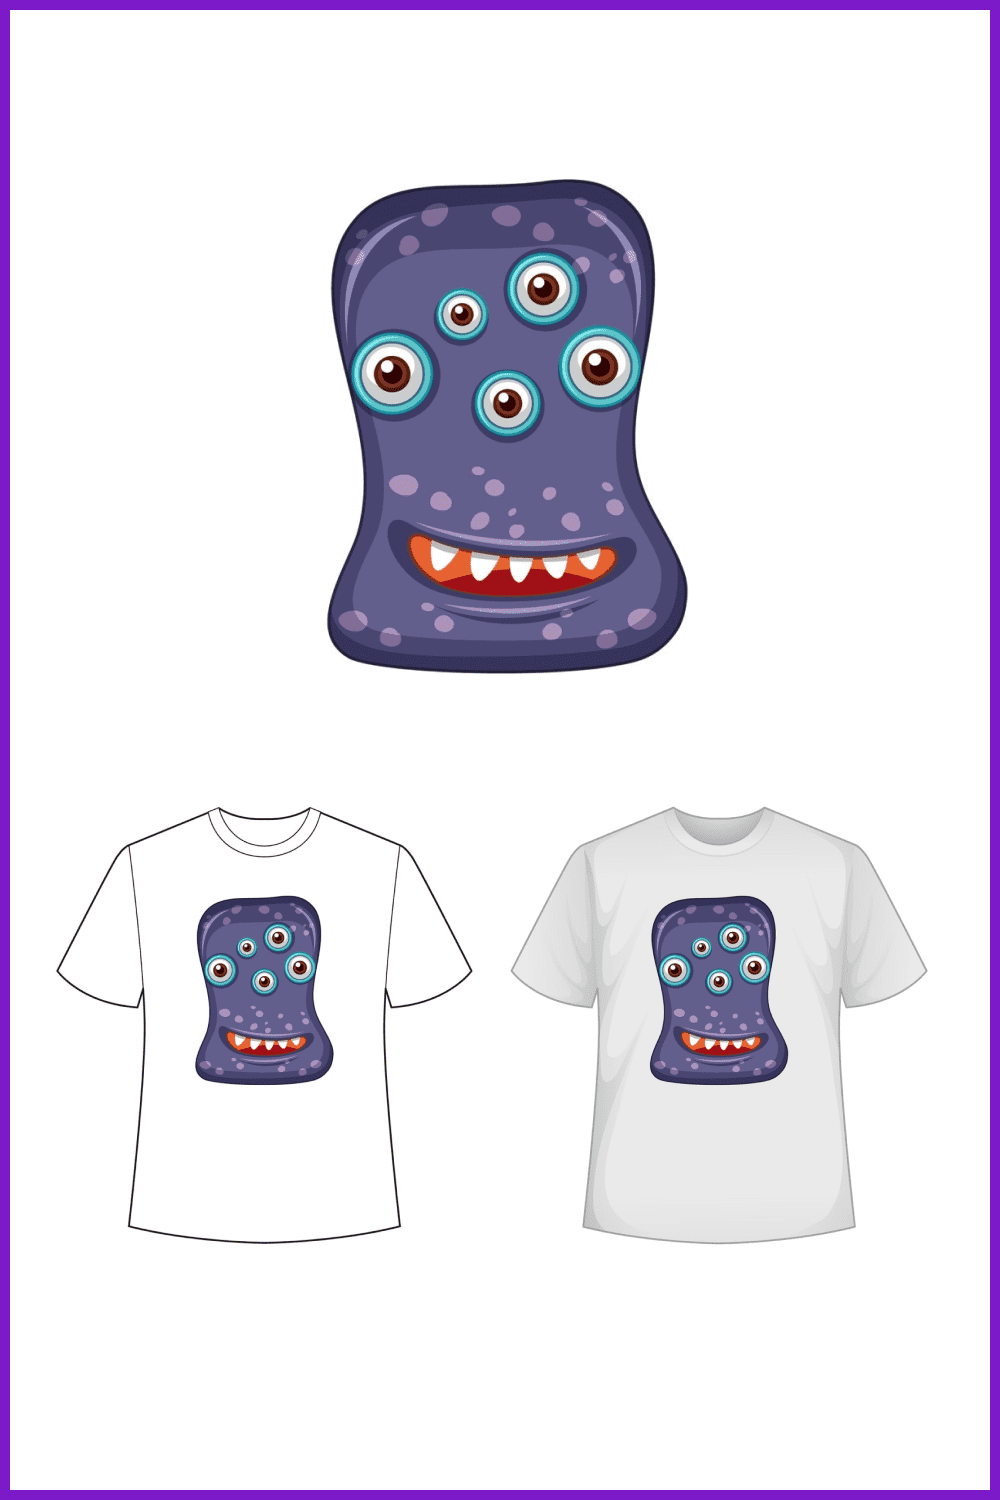 White t-shirts with a painted purple virus.